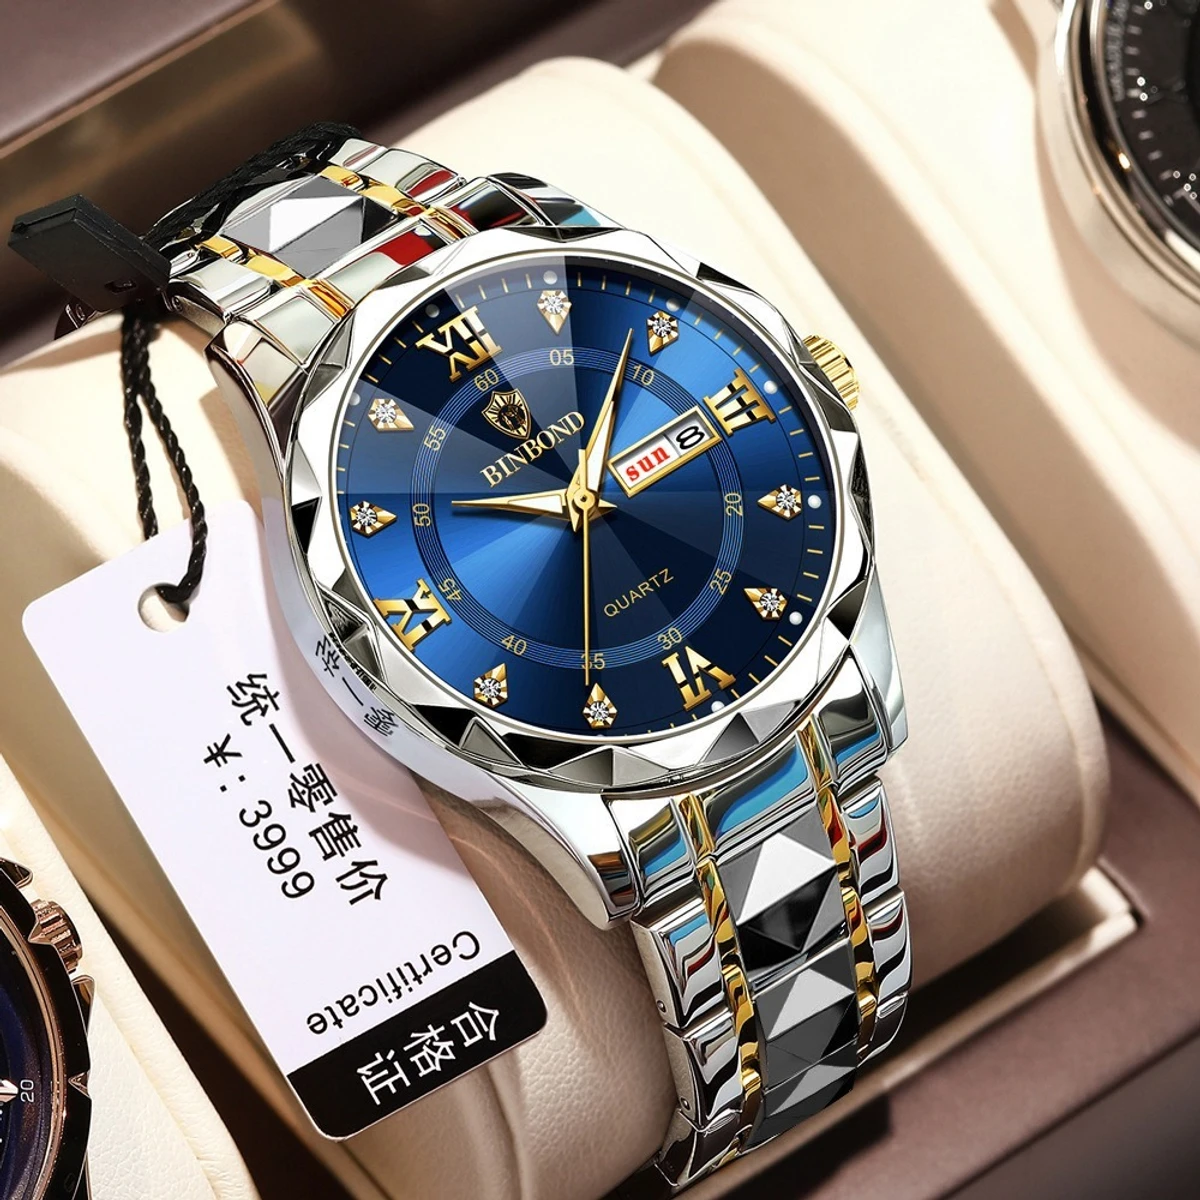 Luxury Binbond Dimon card Digain Stainless Steel Classic Waterproof Watch BINBON NEW DIMON CARD DIGAIN TOTON AR DIAL BLUE COOLER WATCH for Men